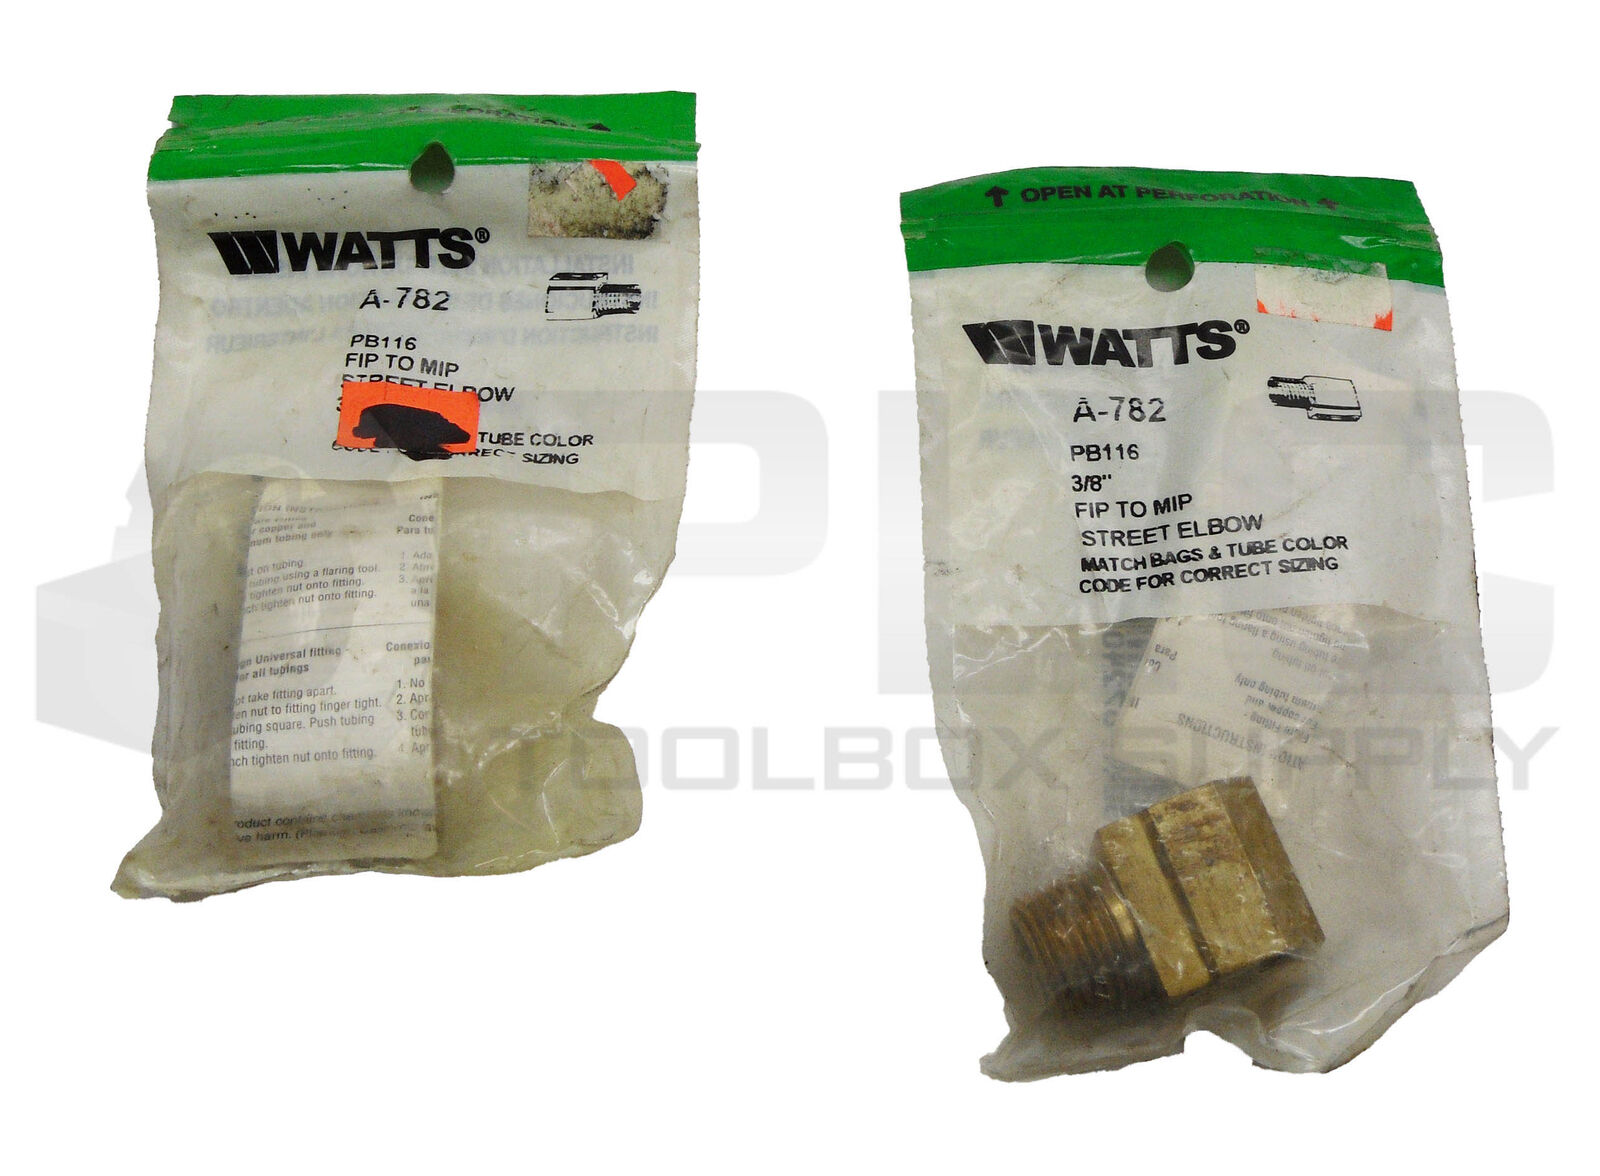 LOT OF 2 SEALED NEW WATTS A-782 FIP TO MIP STREET ELBOW 3/8\